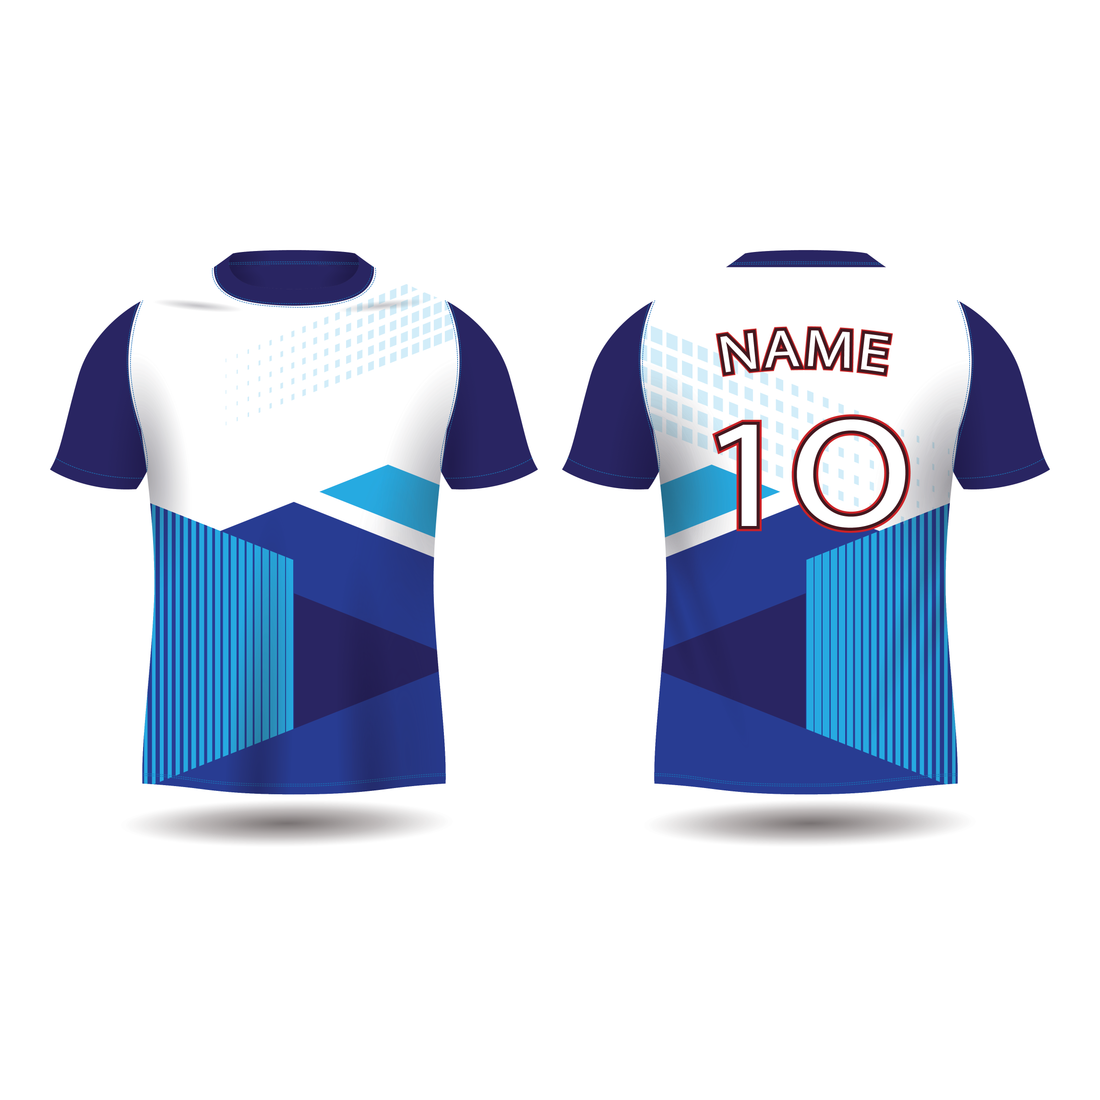 NEXT PRINT All Over Printed Customized Sublimation T-Shirt Unisex Sports Jersey Player Name & Number, Team Name NP50000249